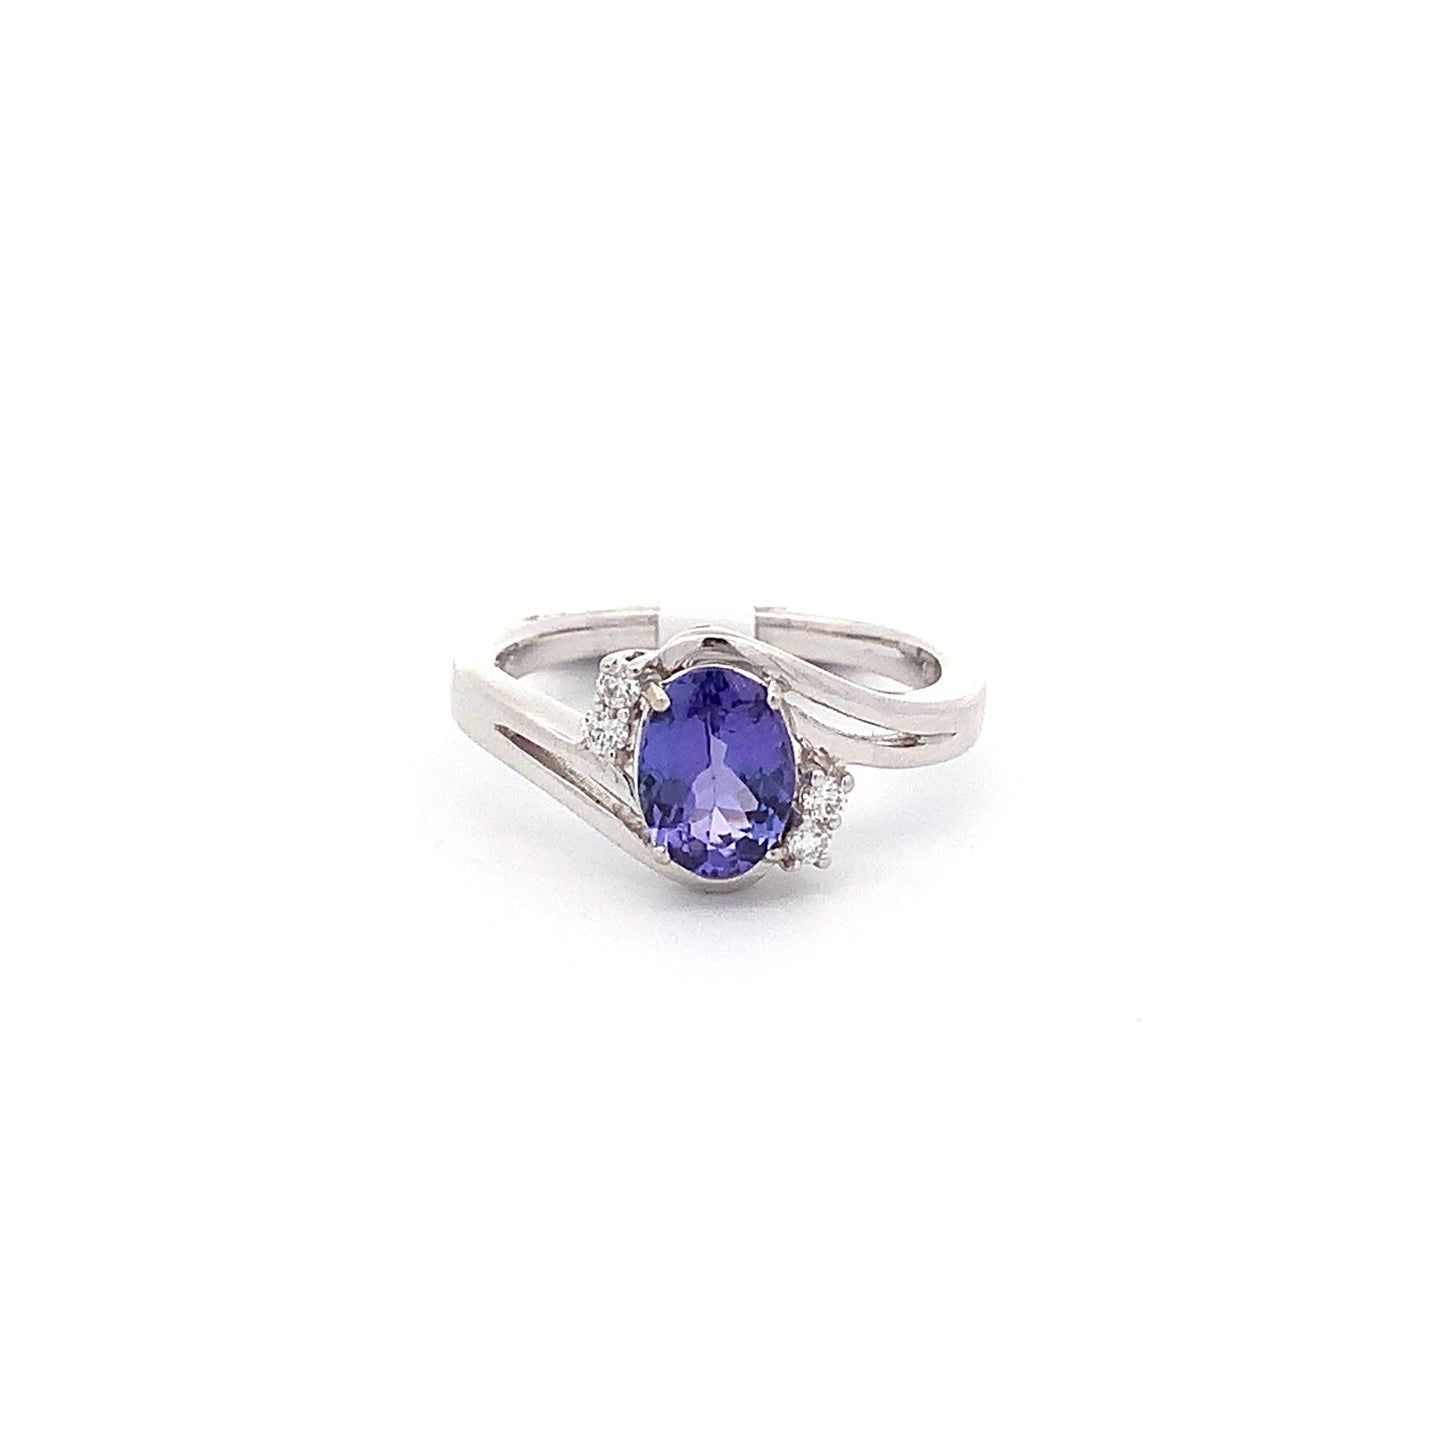 Tanzanite Ring R22607 - Royal Gems and Jewelry